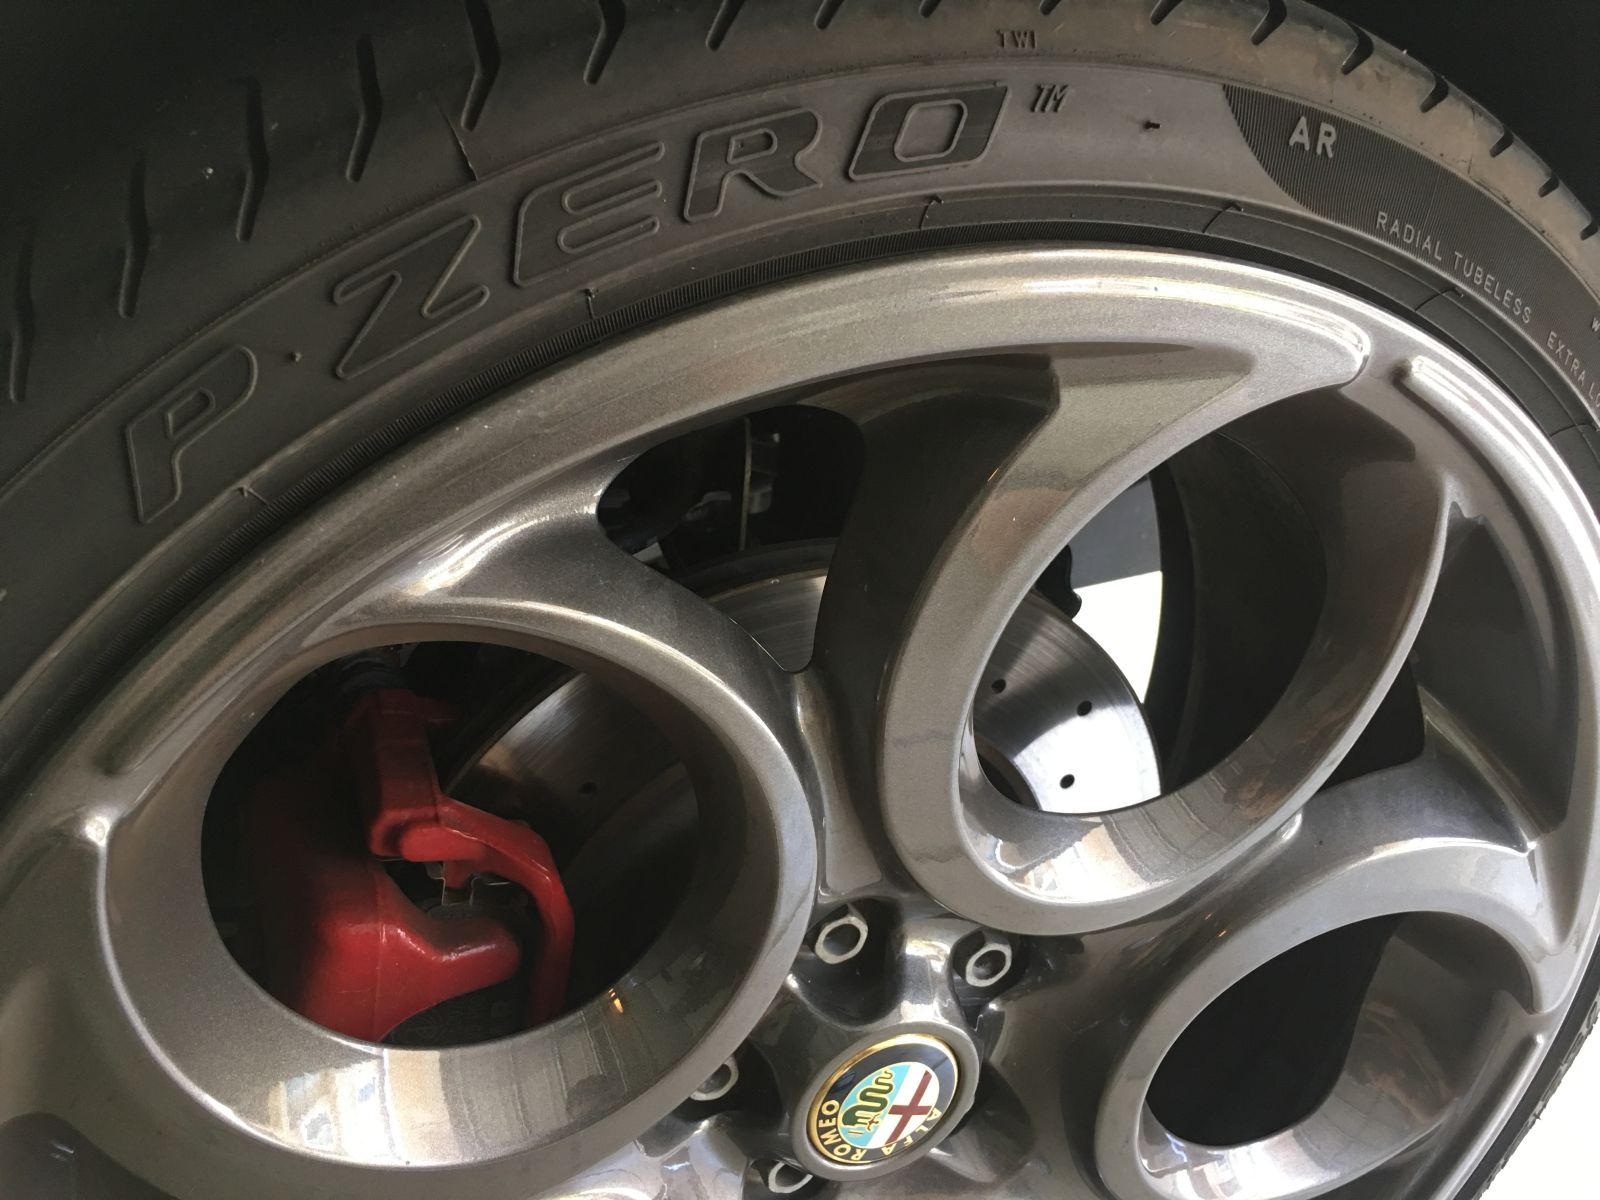 The wheels are another styling highlight, but the strange thing is Alfa chose a tire size that nobody makes. So for now I’m stuck with buying the special “AR” version of these Pirelli P-Zero tires. They’re okay, I guess.